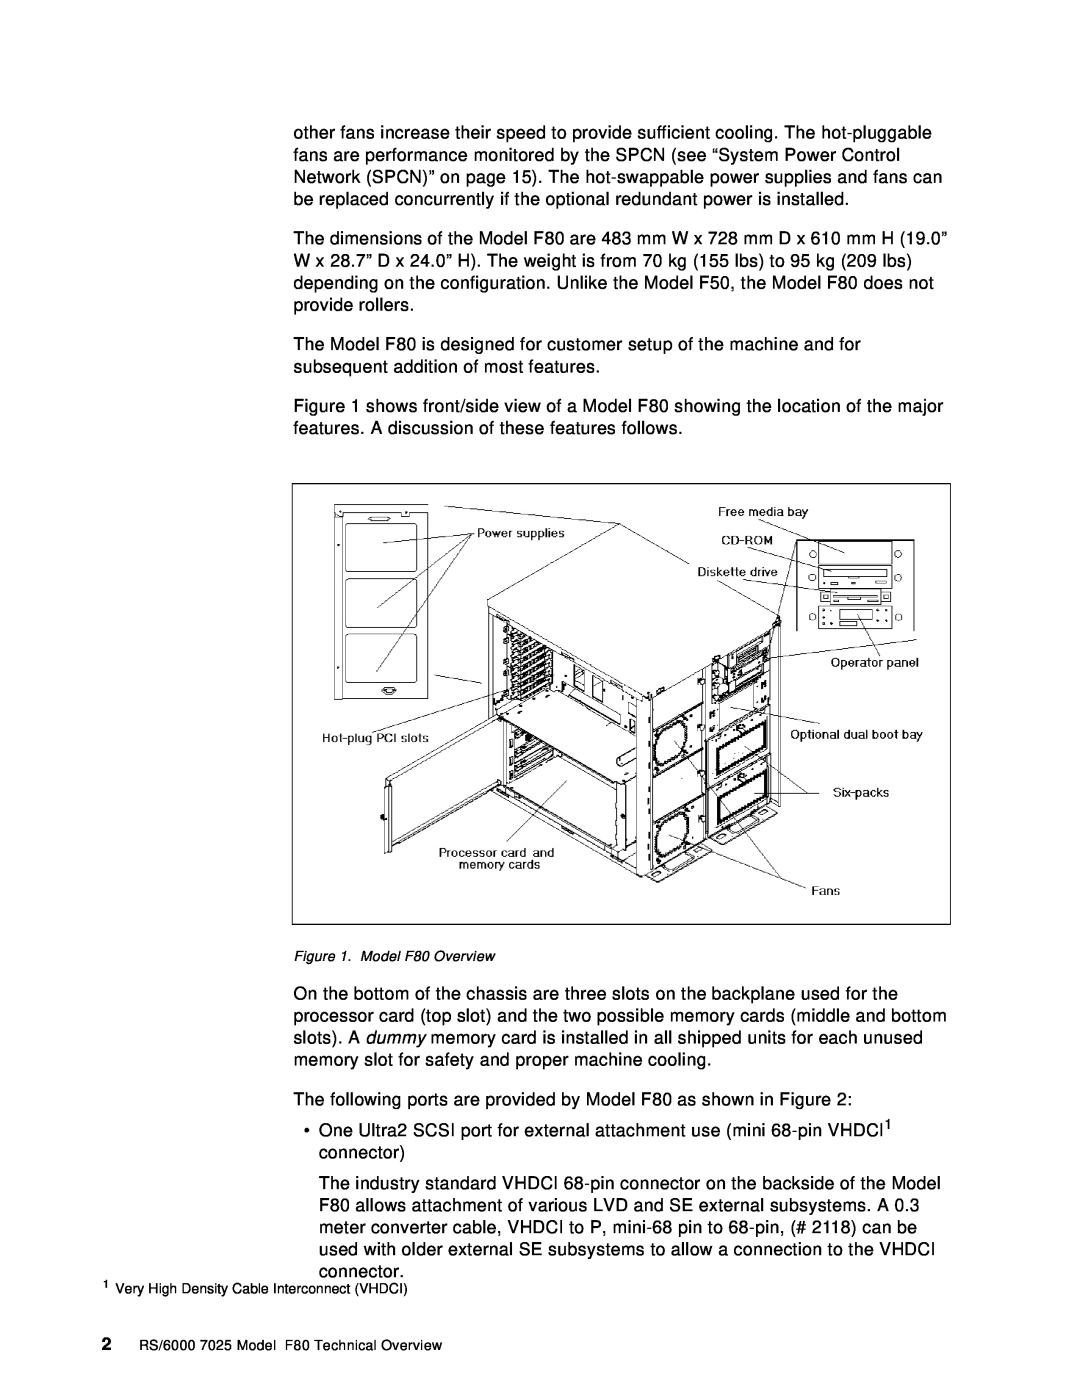 IBM manual The following ports are provided by Model F80 as shown in Figure 